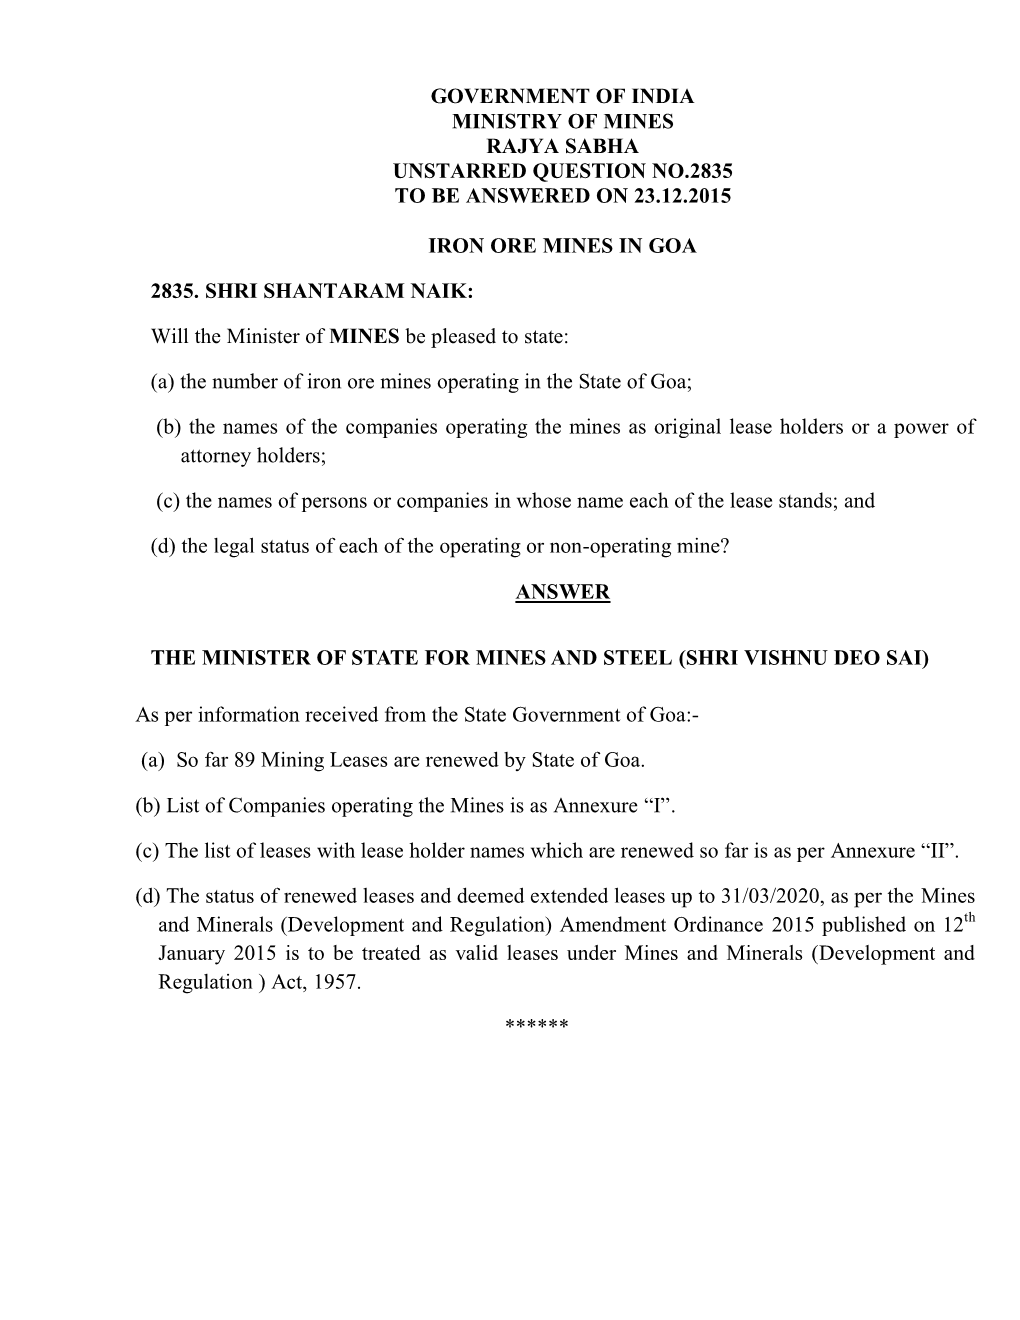 Government of India Ministry of Mines Rajya Sabha Unstarred Question No.2835 to Be Answered on 23.12.2015